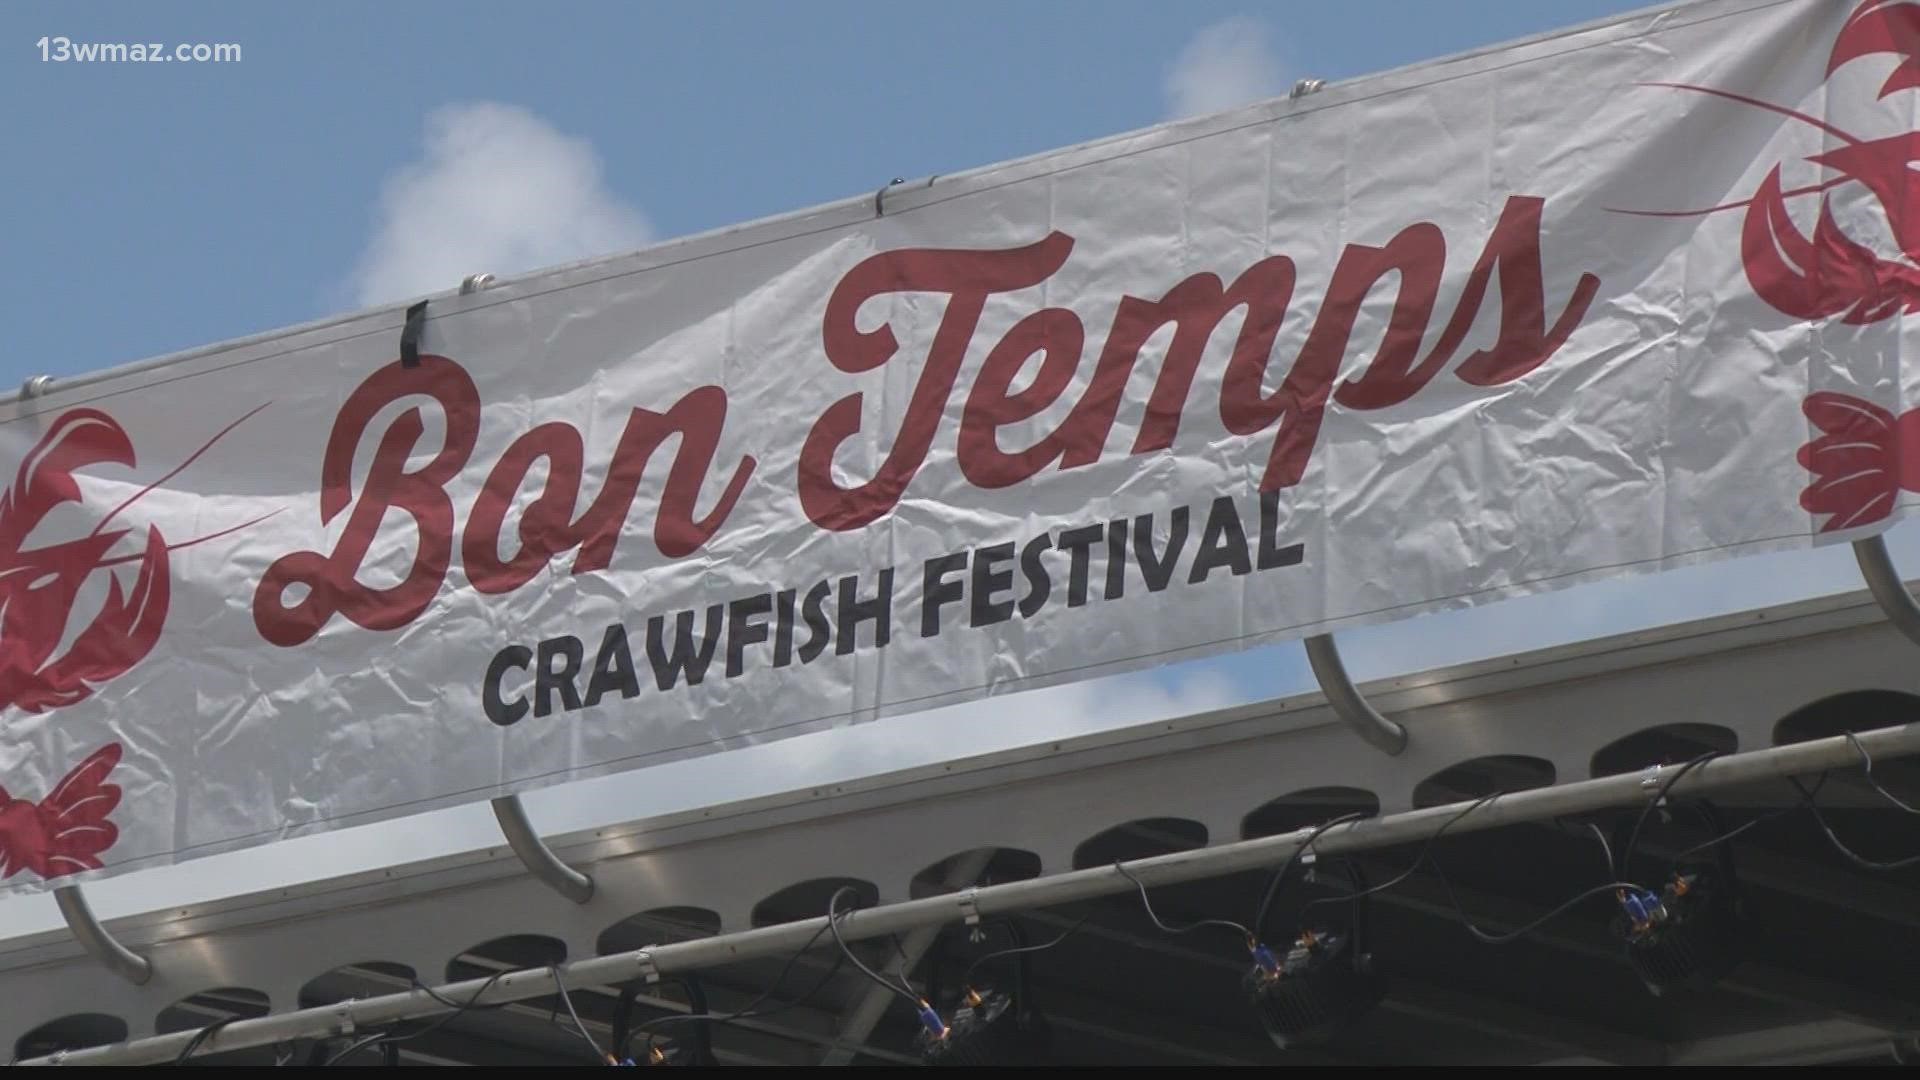 Thousands of pounds of crawfish straight from the Gulf were purged, seasoned, boiled and served with fresh corn and potatoes.